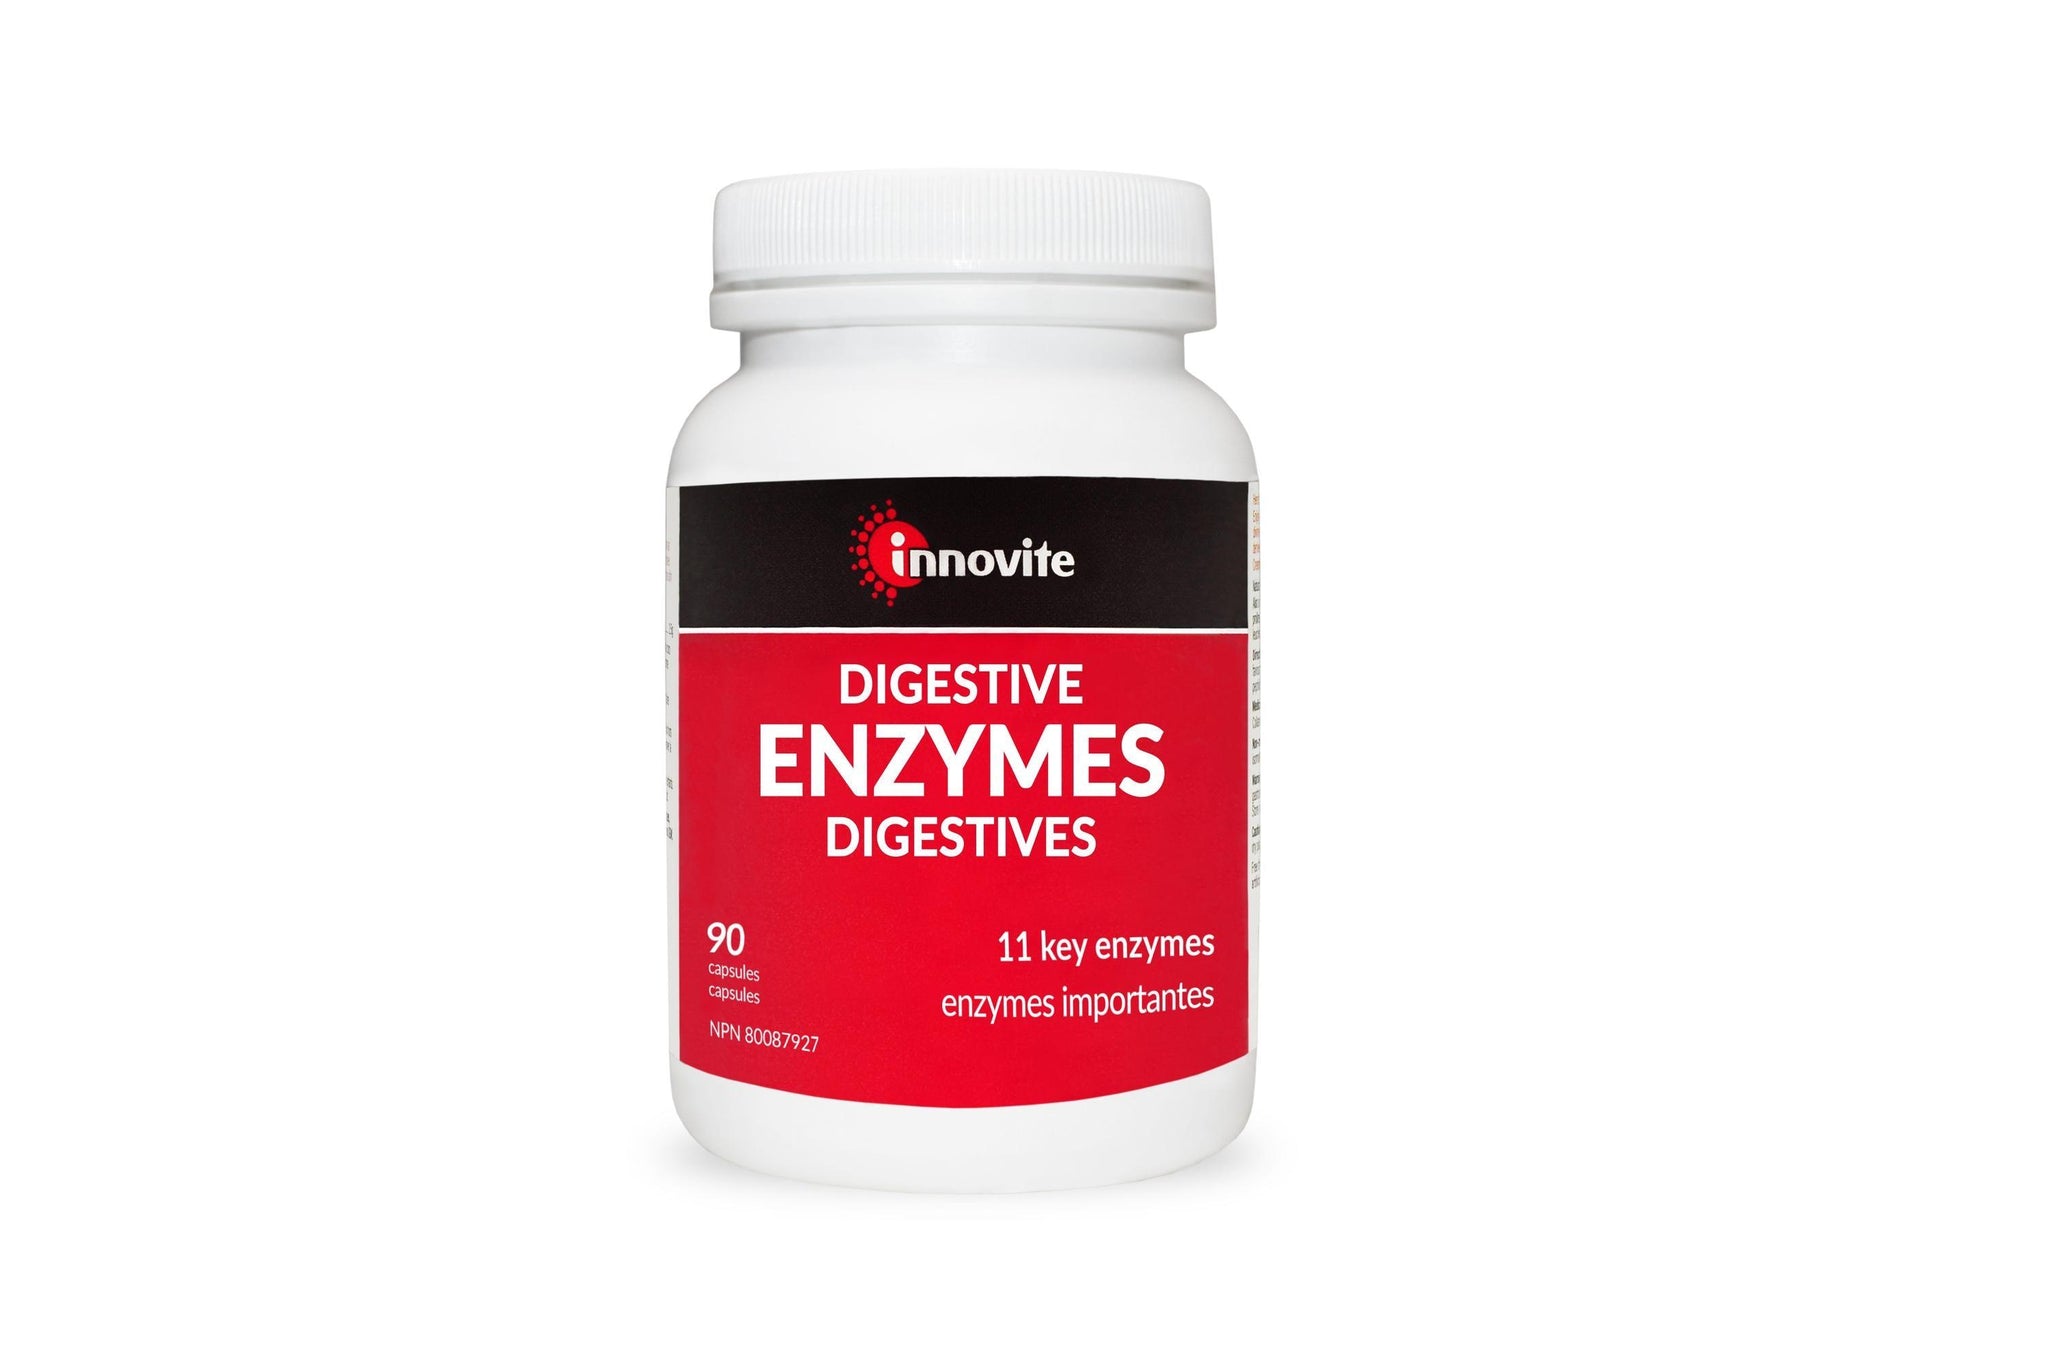 Innovite Digestive Enzymes 90ct Online